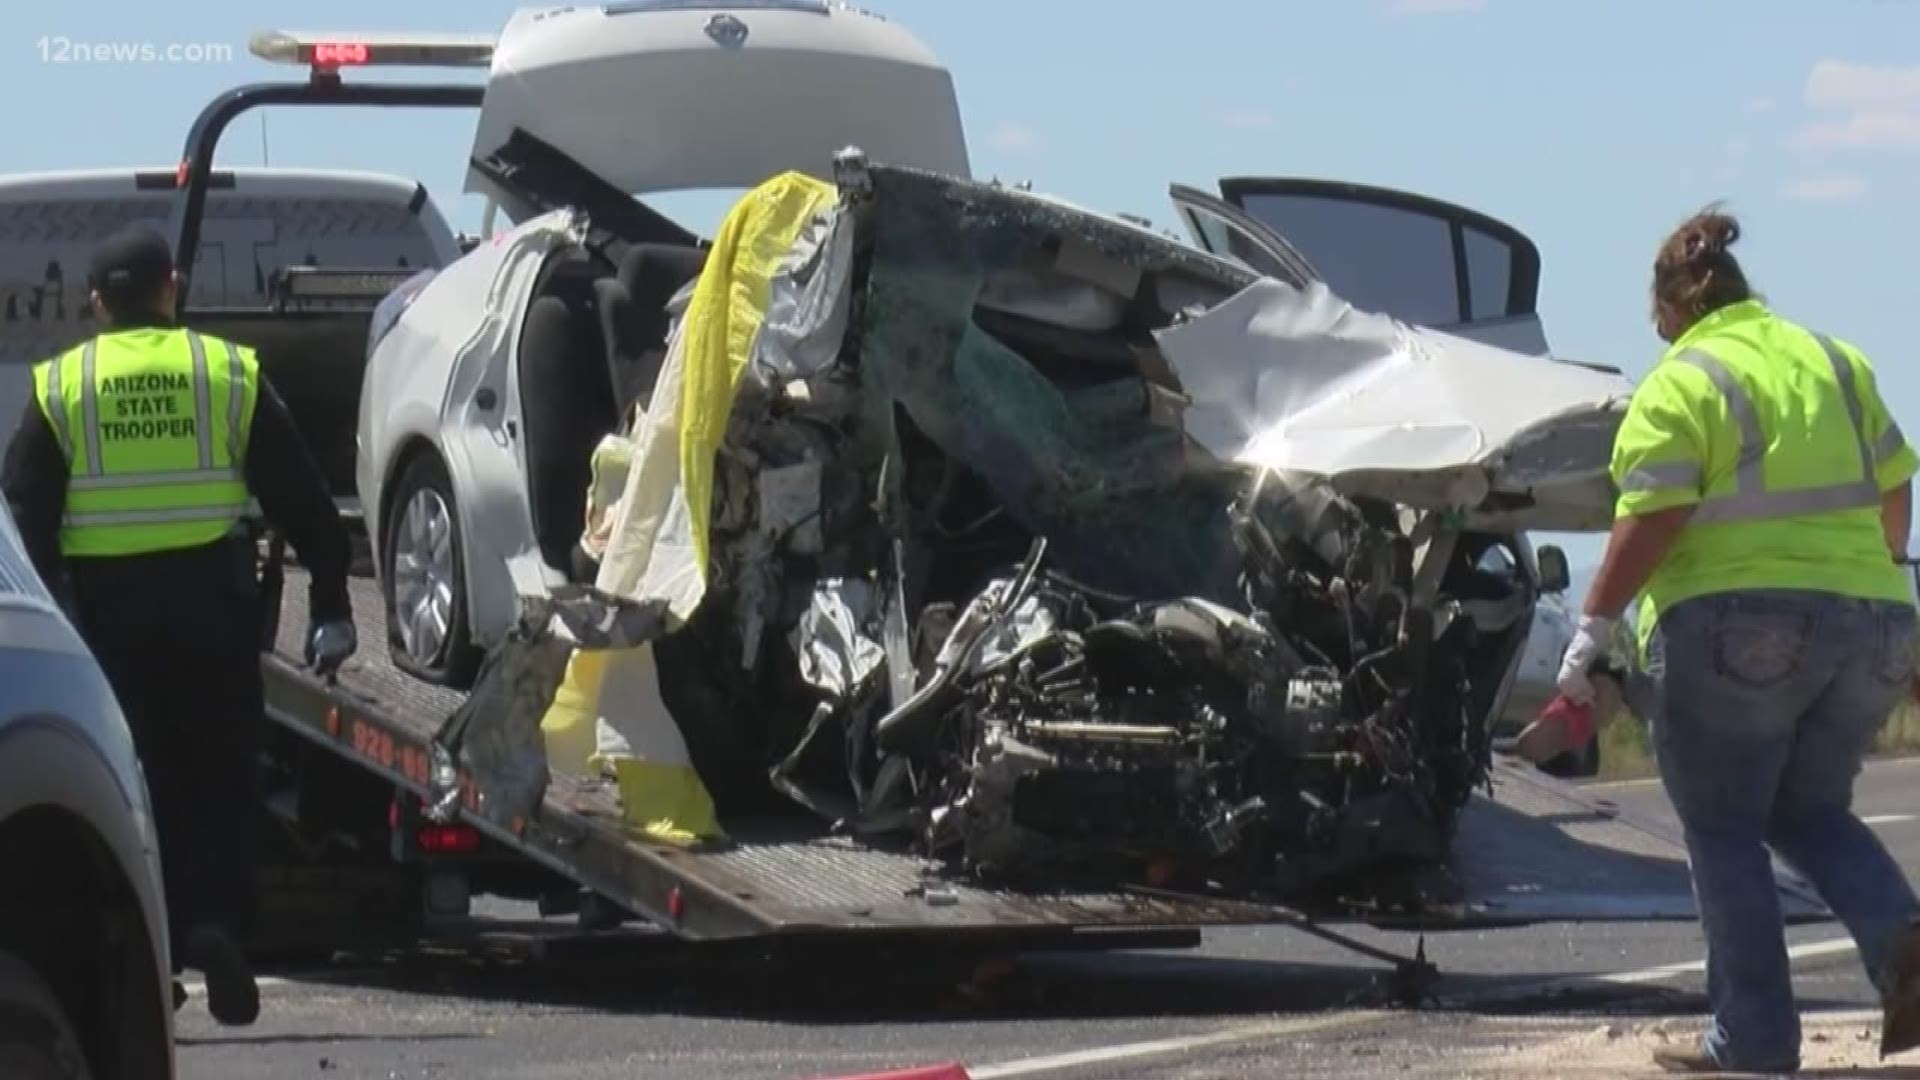 Five people were killed in a head-on crash on I-40 near Kingman, AZ this morning. The driver of the wrong-way car was an 82-year-old man from Nevada.